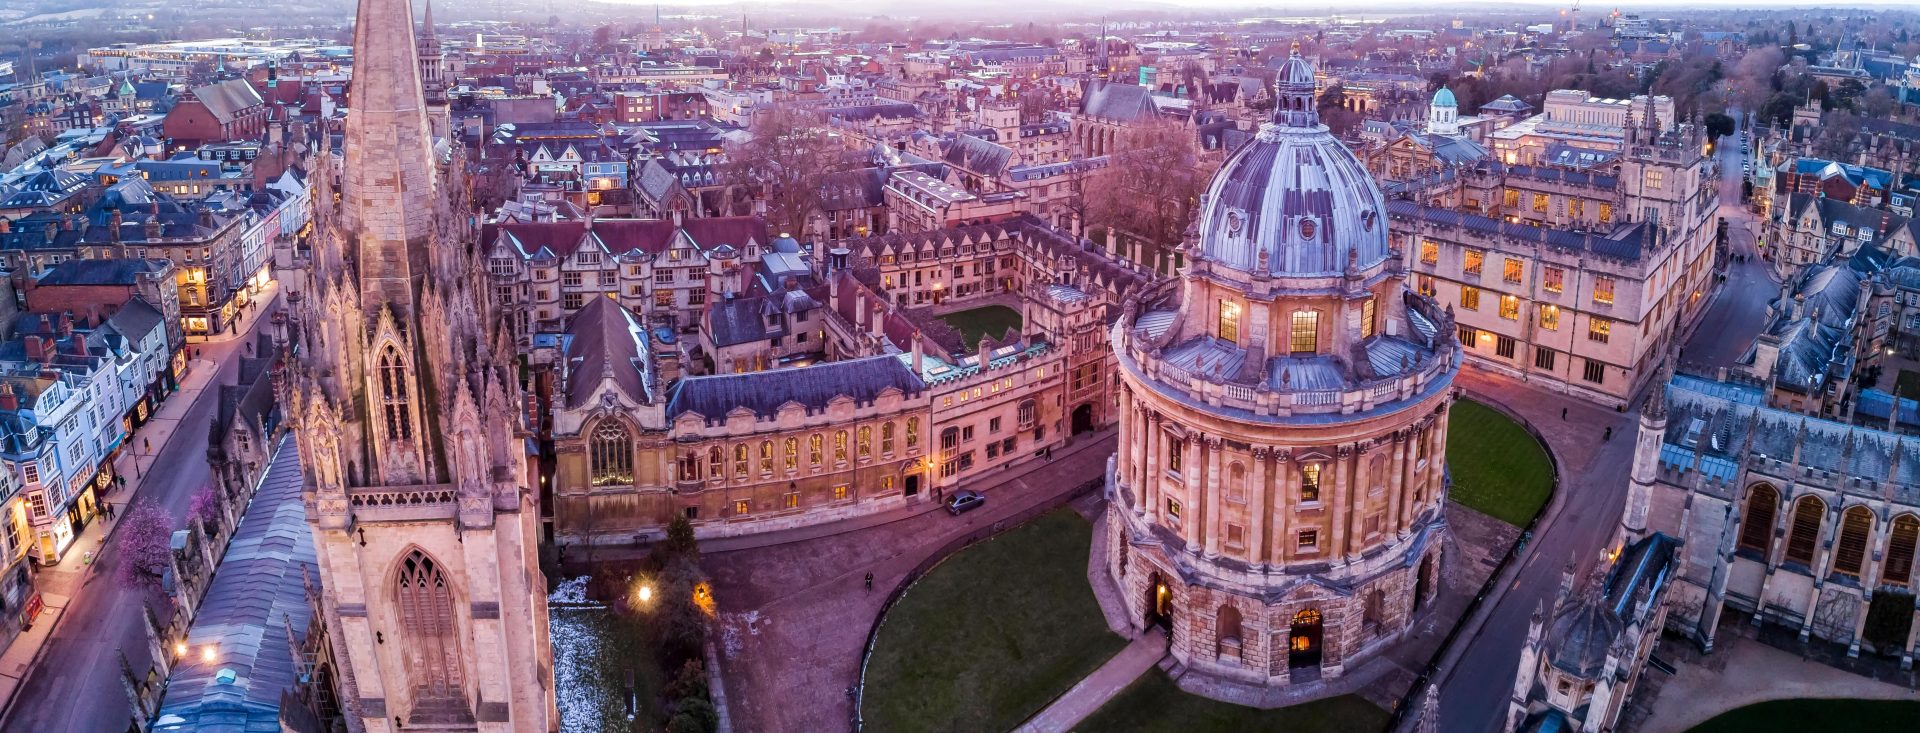 Aerial evening view of central Oxford, UK Licensed